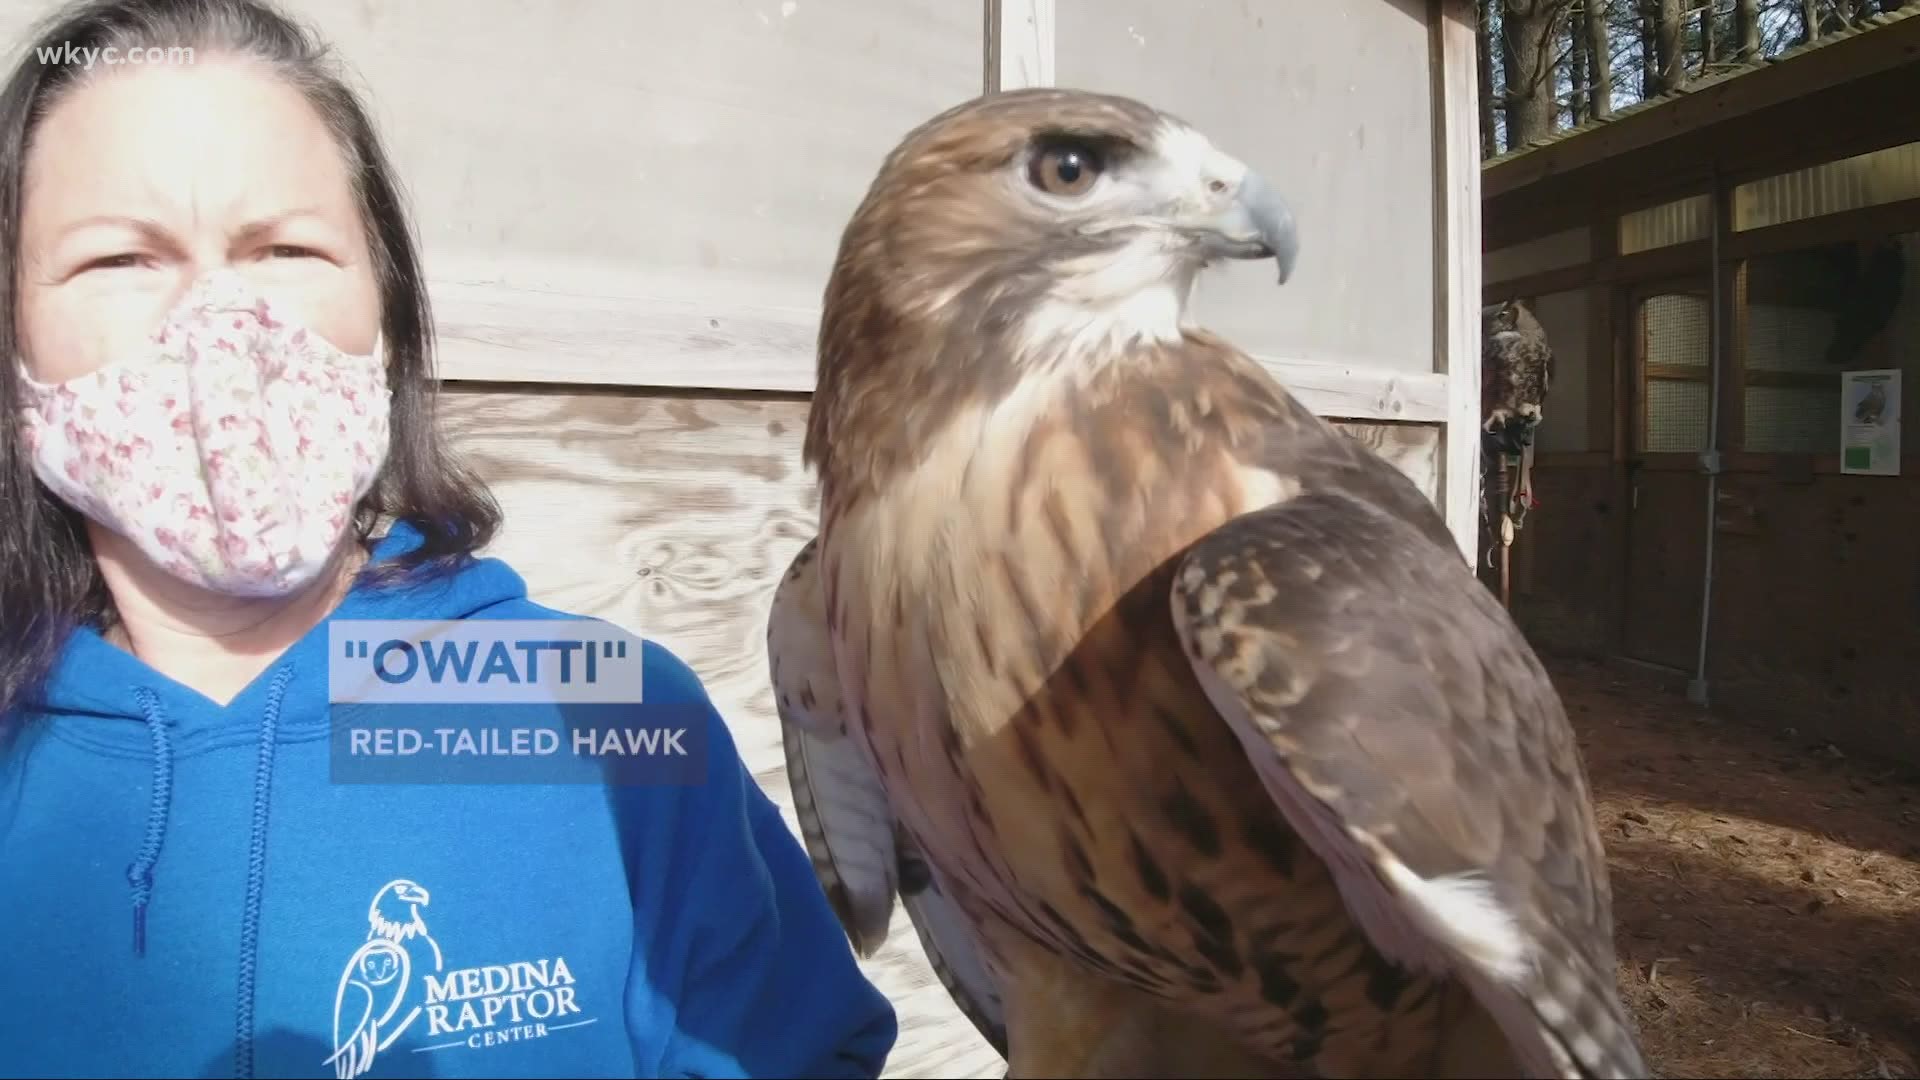 Jan. 22, 2021: Join 3News' Matt Standridge for a behind-the-scenes look at the Medina Raptor Center to see how the team rescues birds of prey in Northeast Ohio.